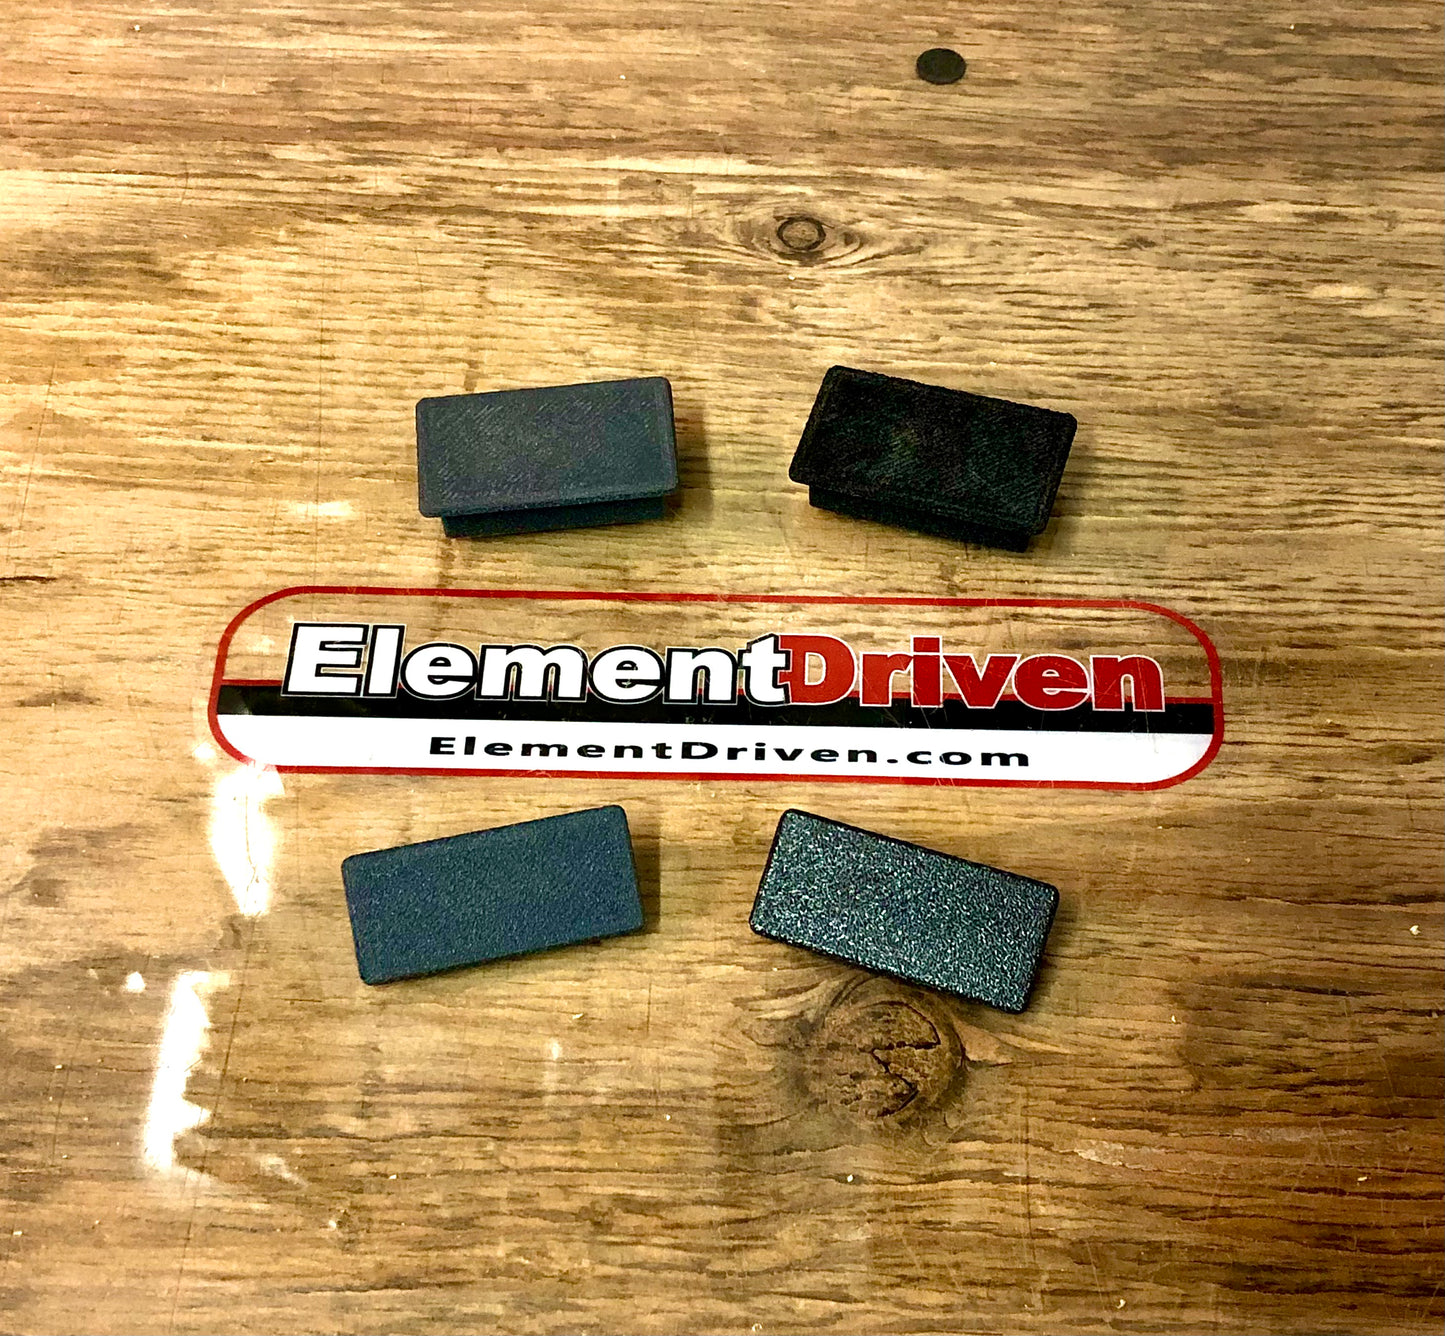 ElementDriven - Plugs for Honda Element Rear-Seat Floor-Latch Covers